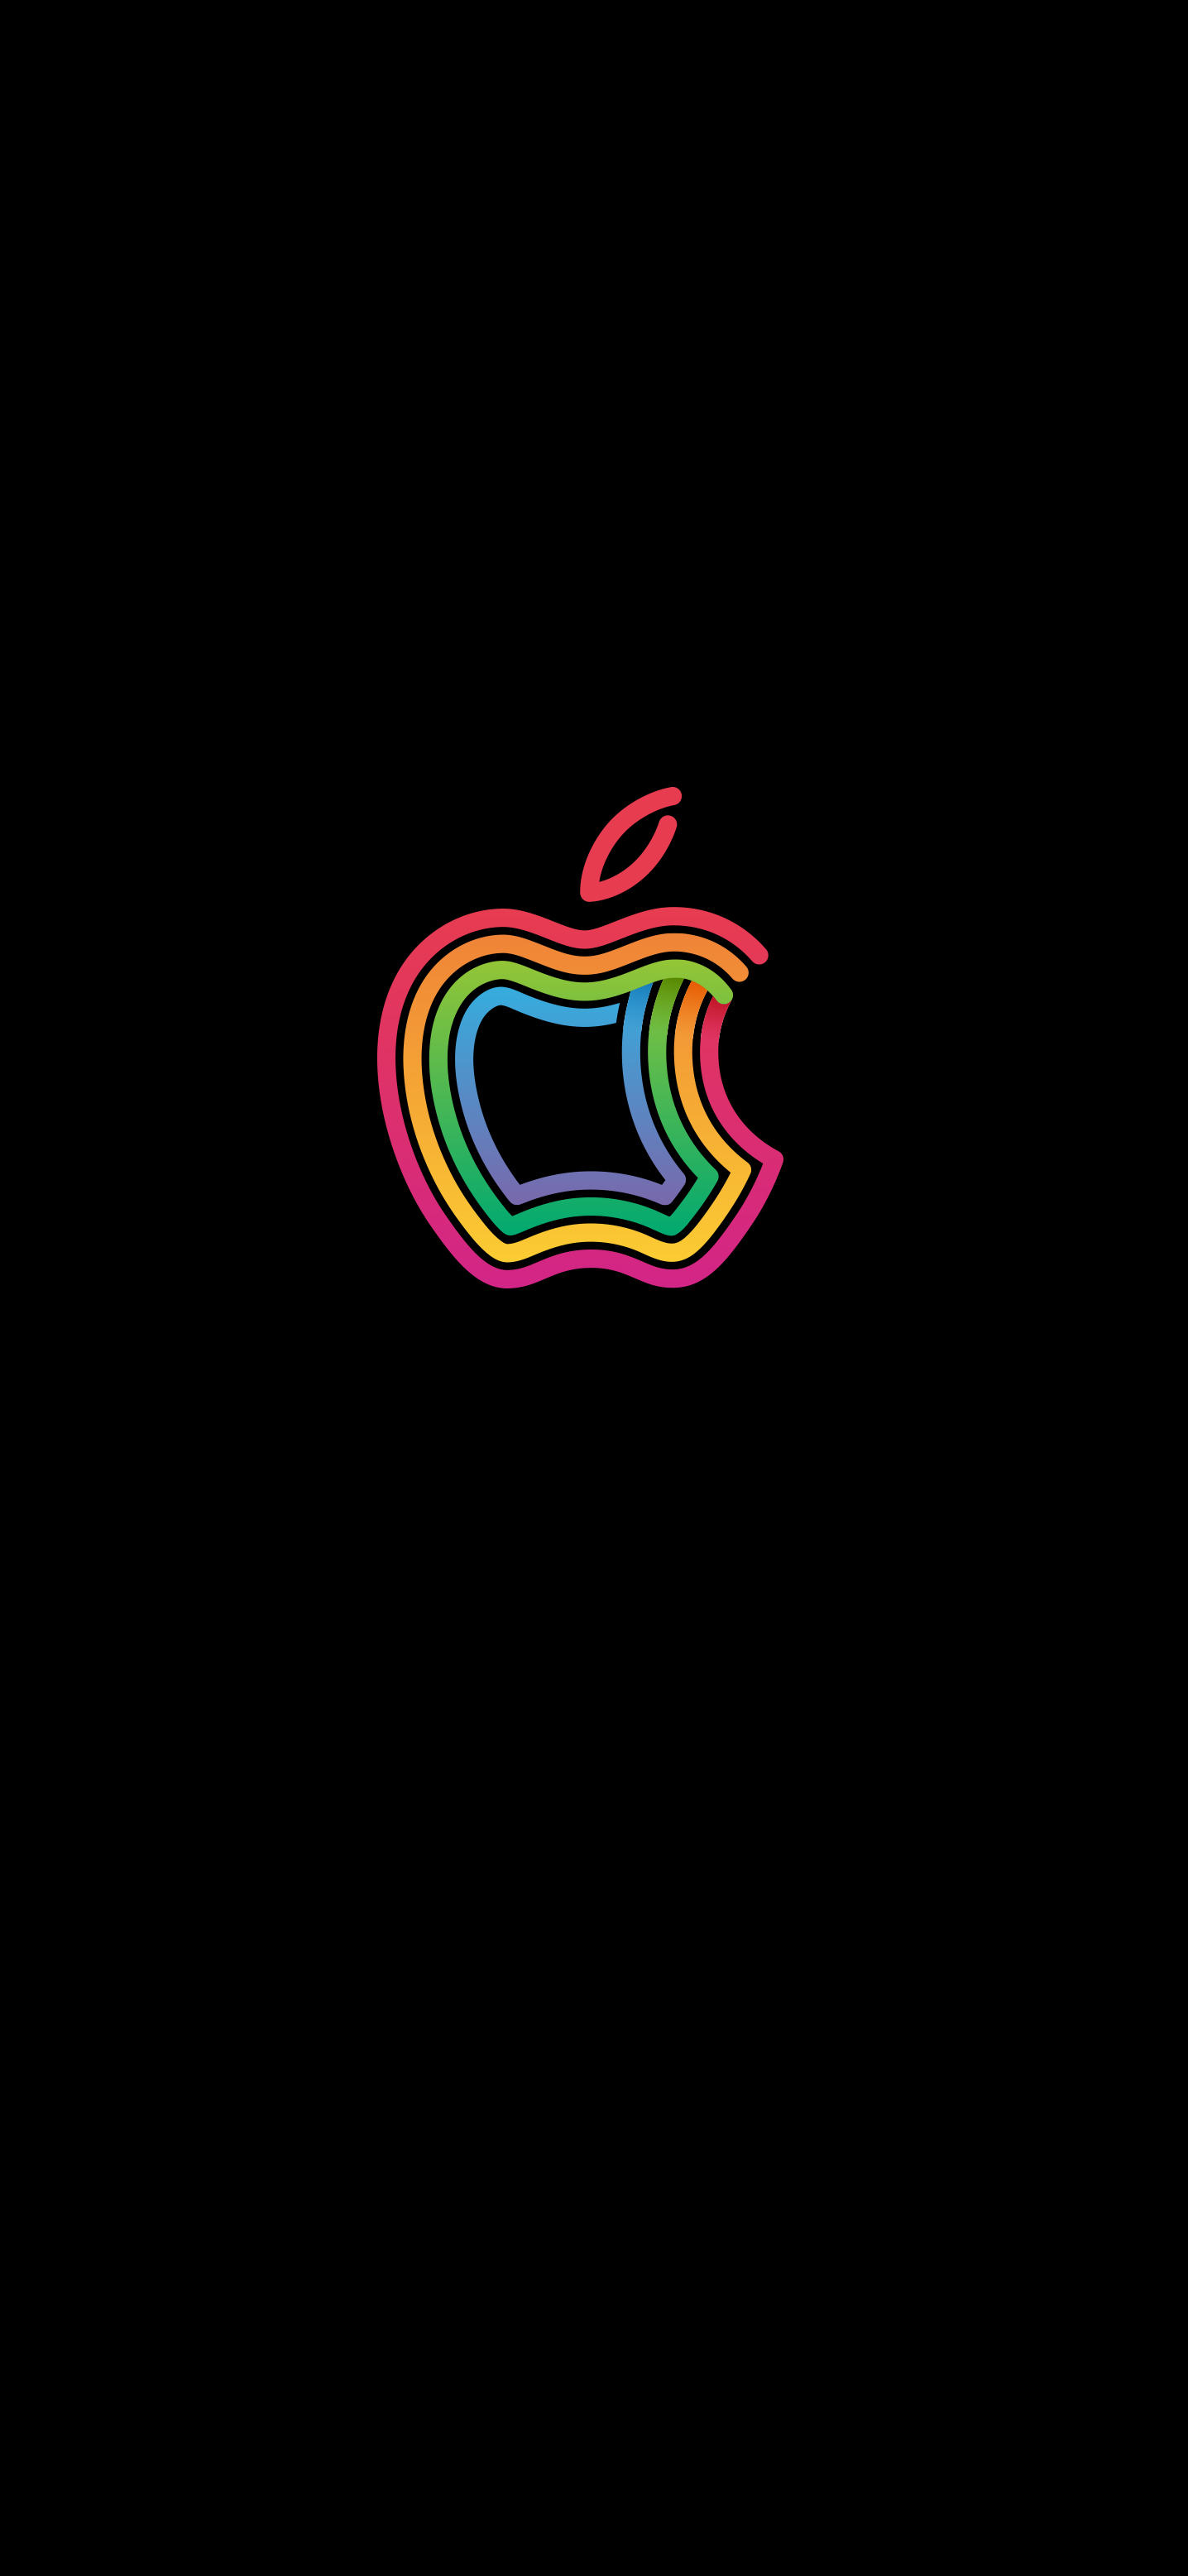 Apple Marunouchi | Two - Wallpapers Central